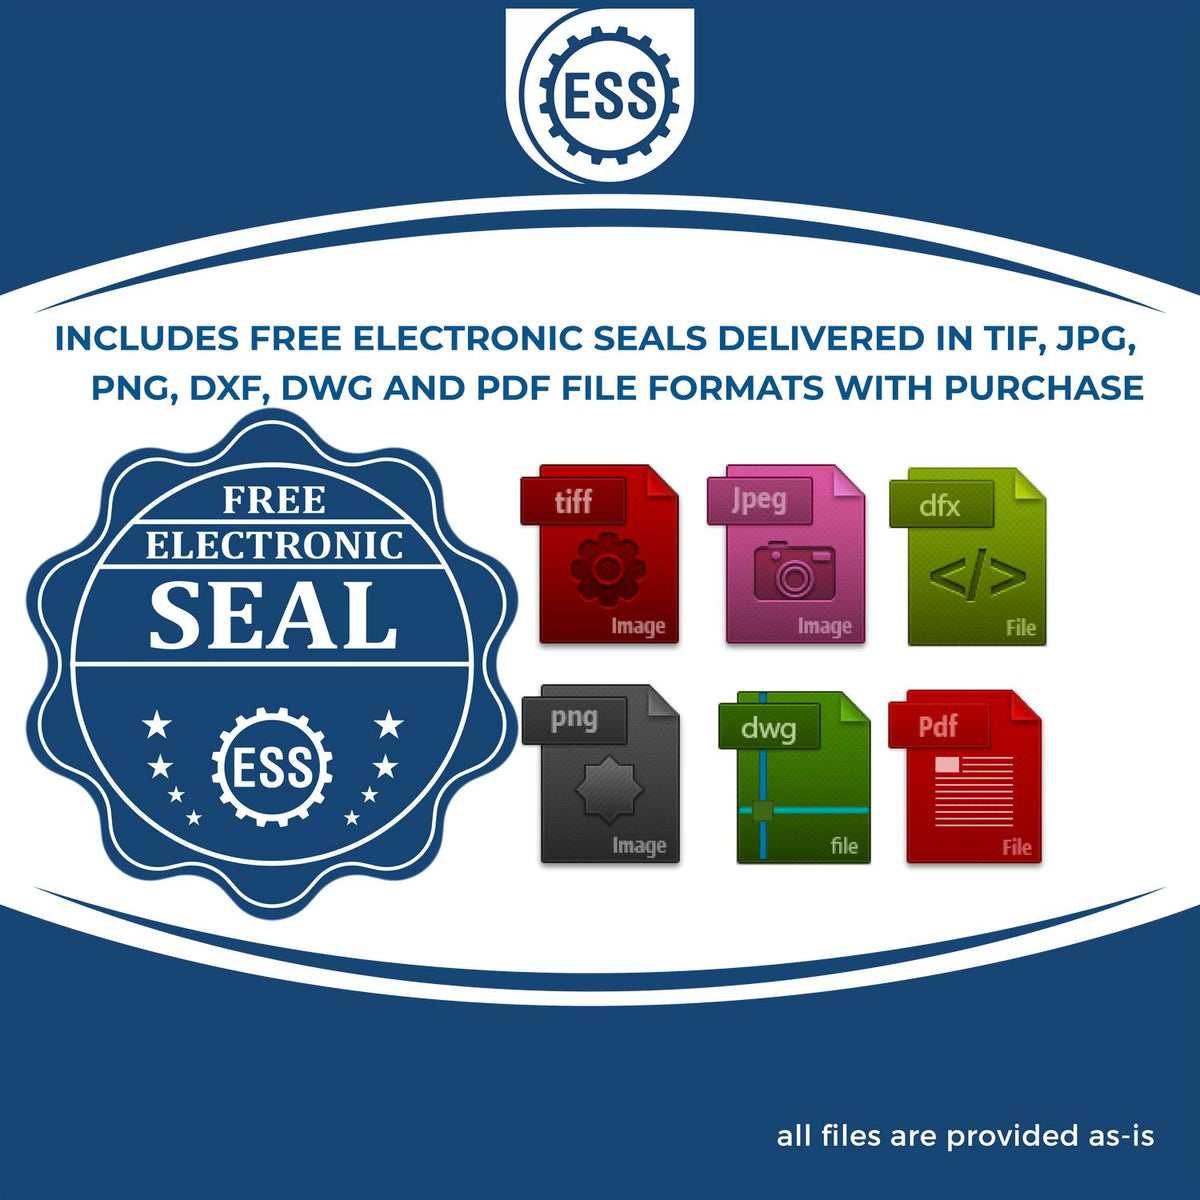 An infographic for the free electronic seal for the Long Reach New Jersey PE Seal illustrating the different file type icons such as DXF, DWG, TIF, JPG and PNG.